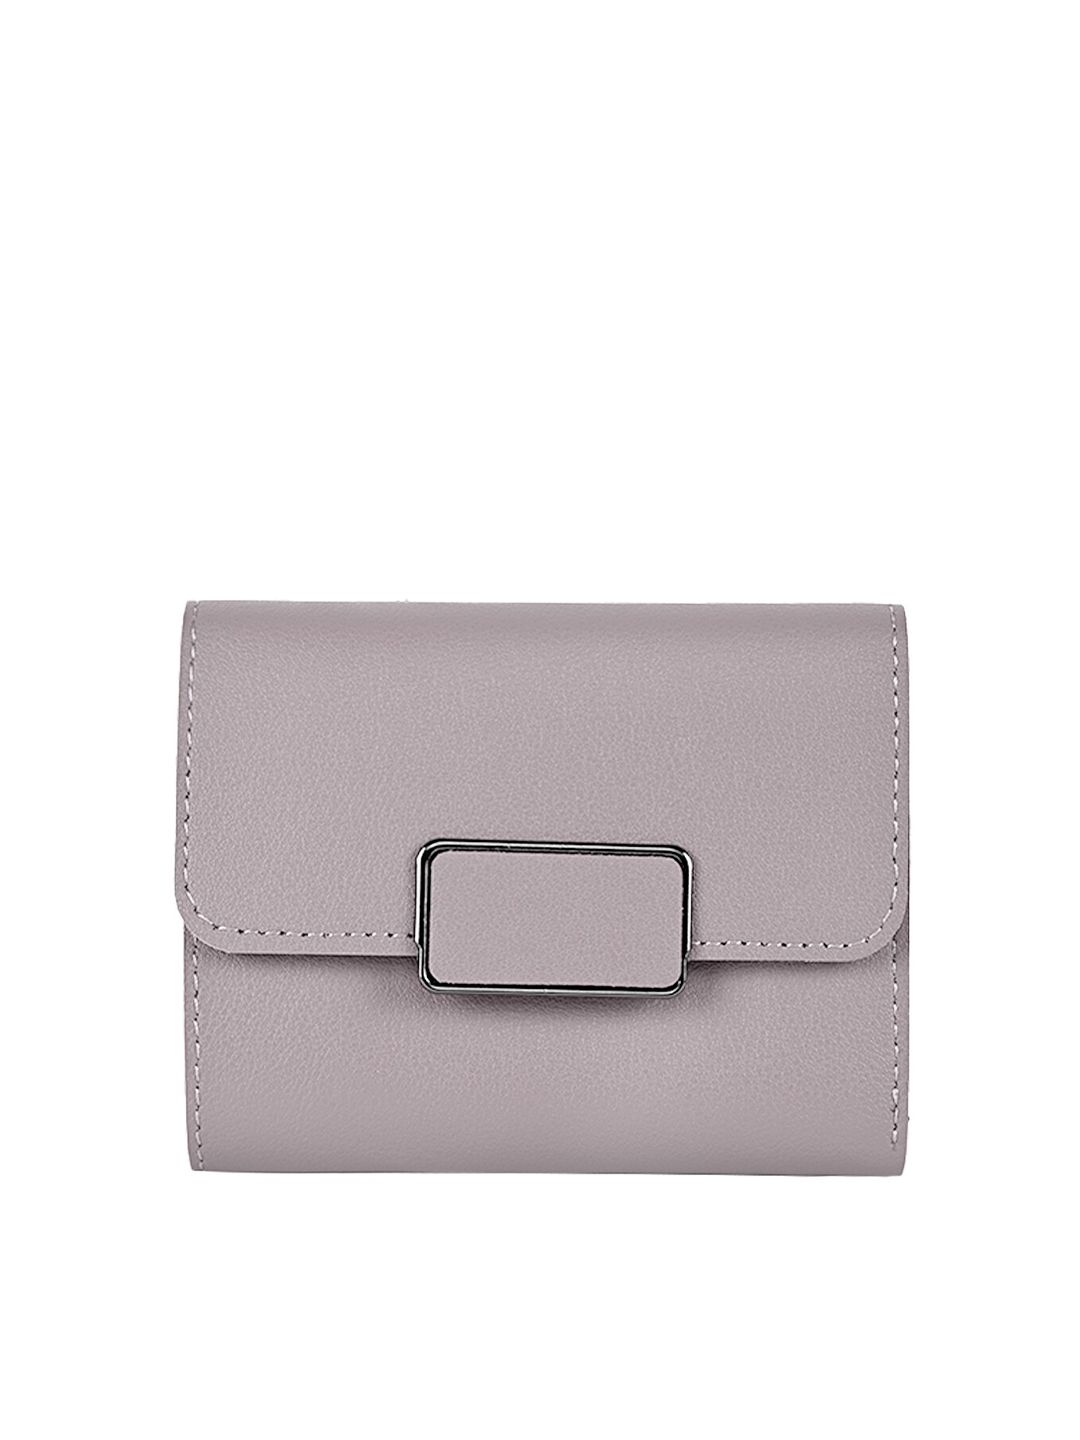 Apsis Women Lavender Textured Three Fold Wallet Price in India